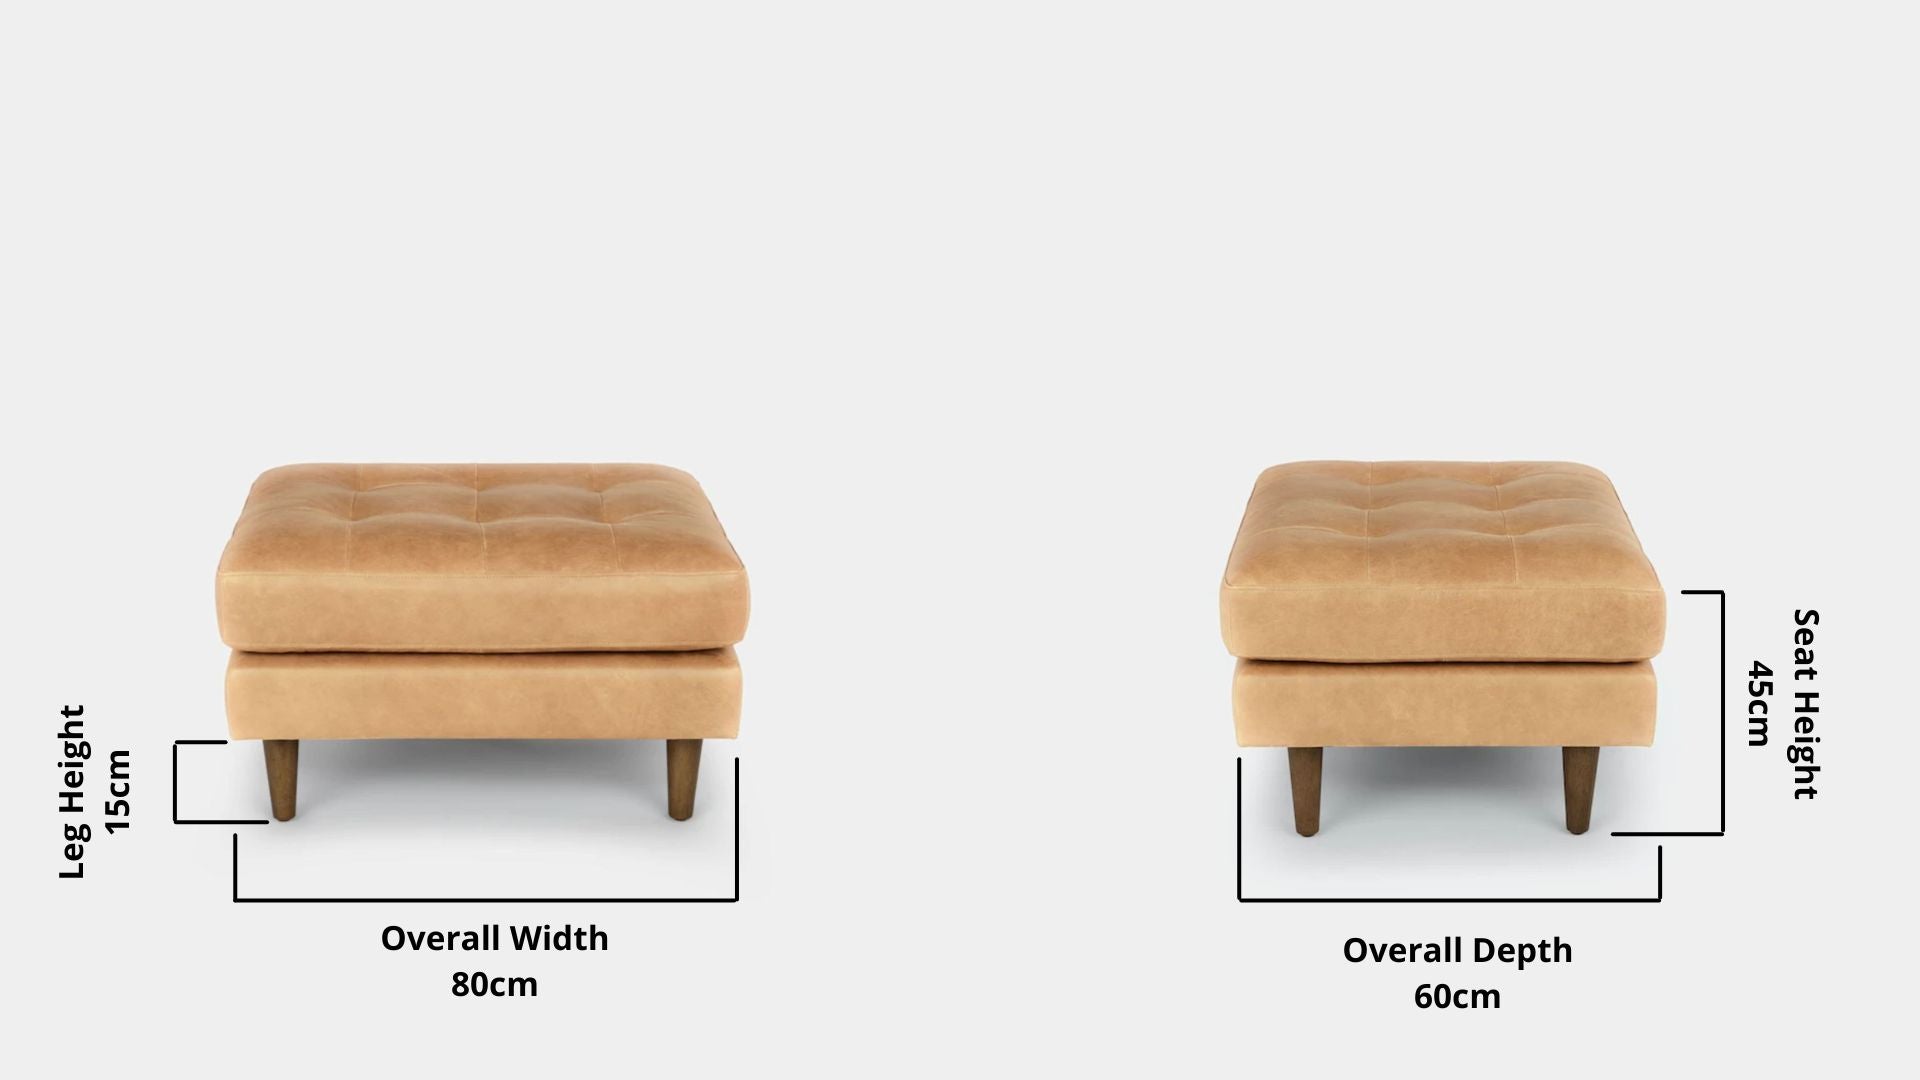 Details the key dimensions in terms of overall width, overall depth and seat width for Castle Full Leather Ottoman